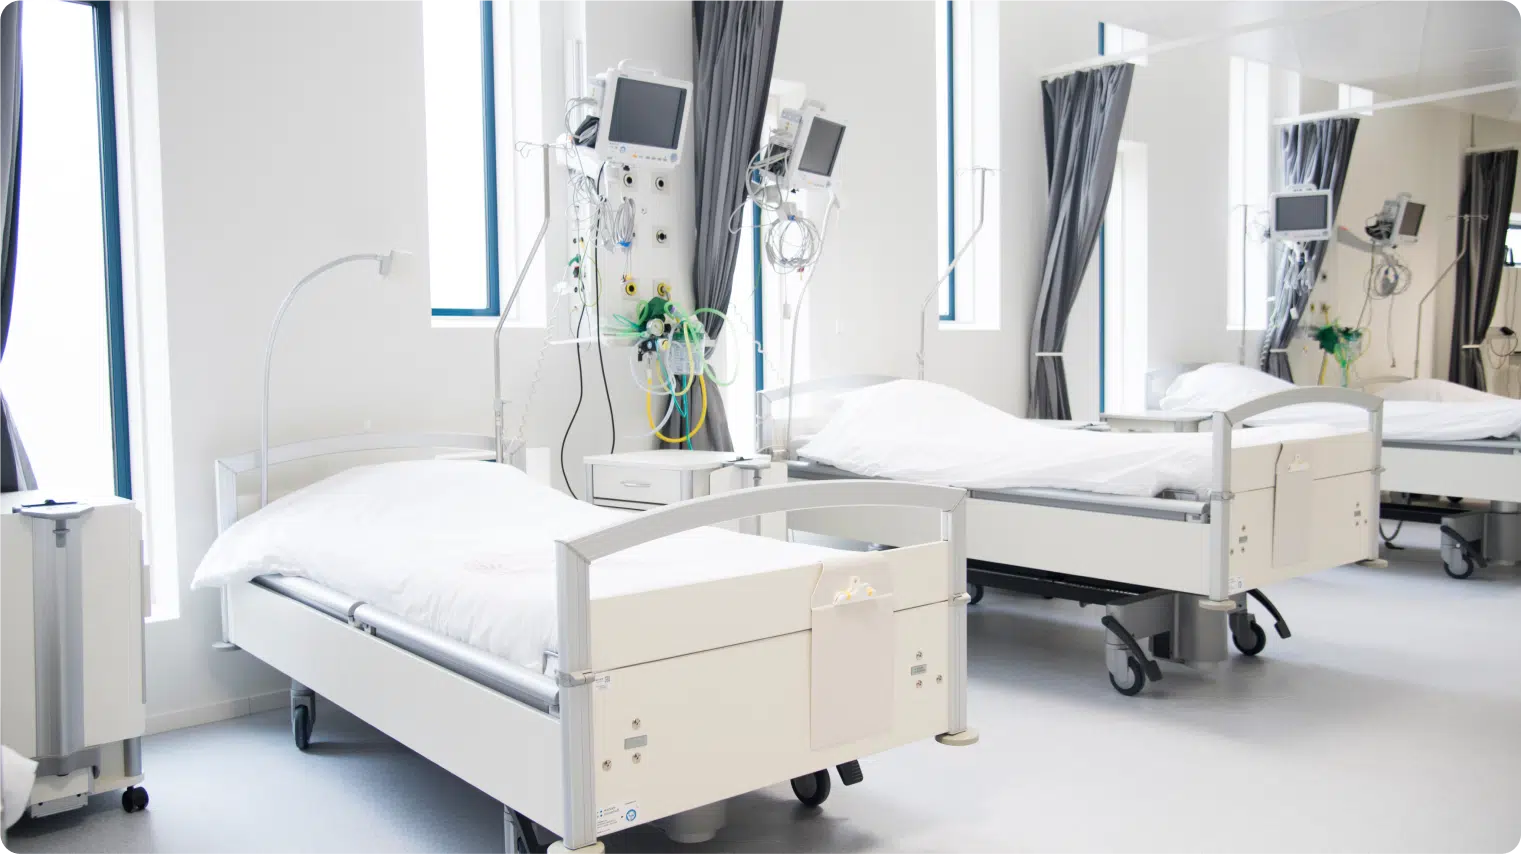 Efficient Asset Management in Hospitals and Medical Facilities 